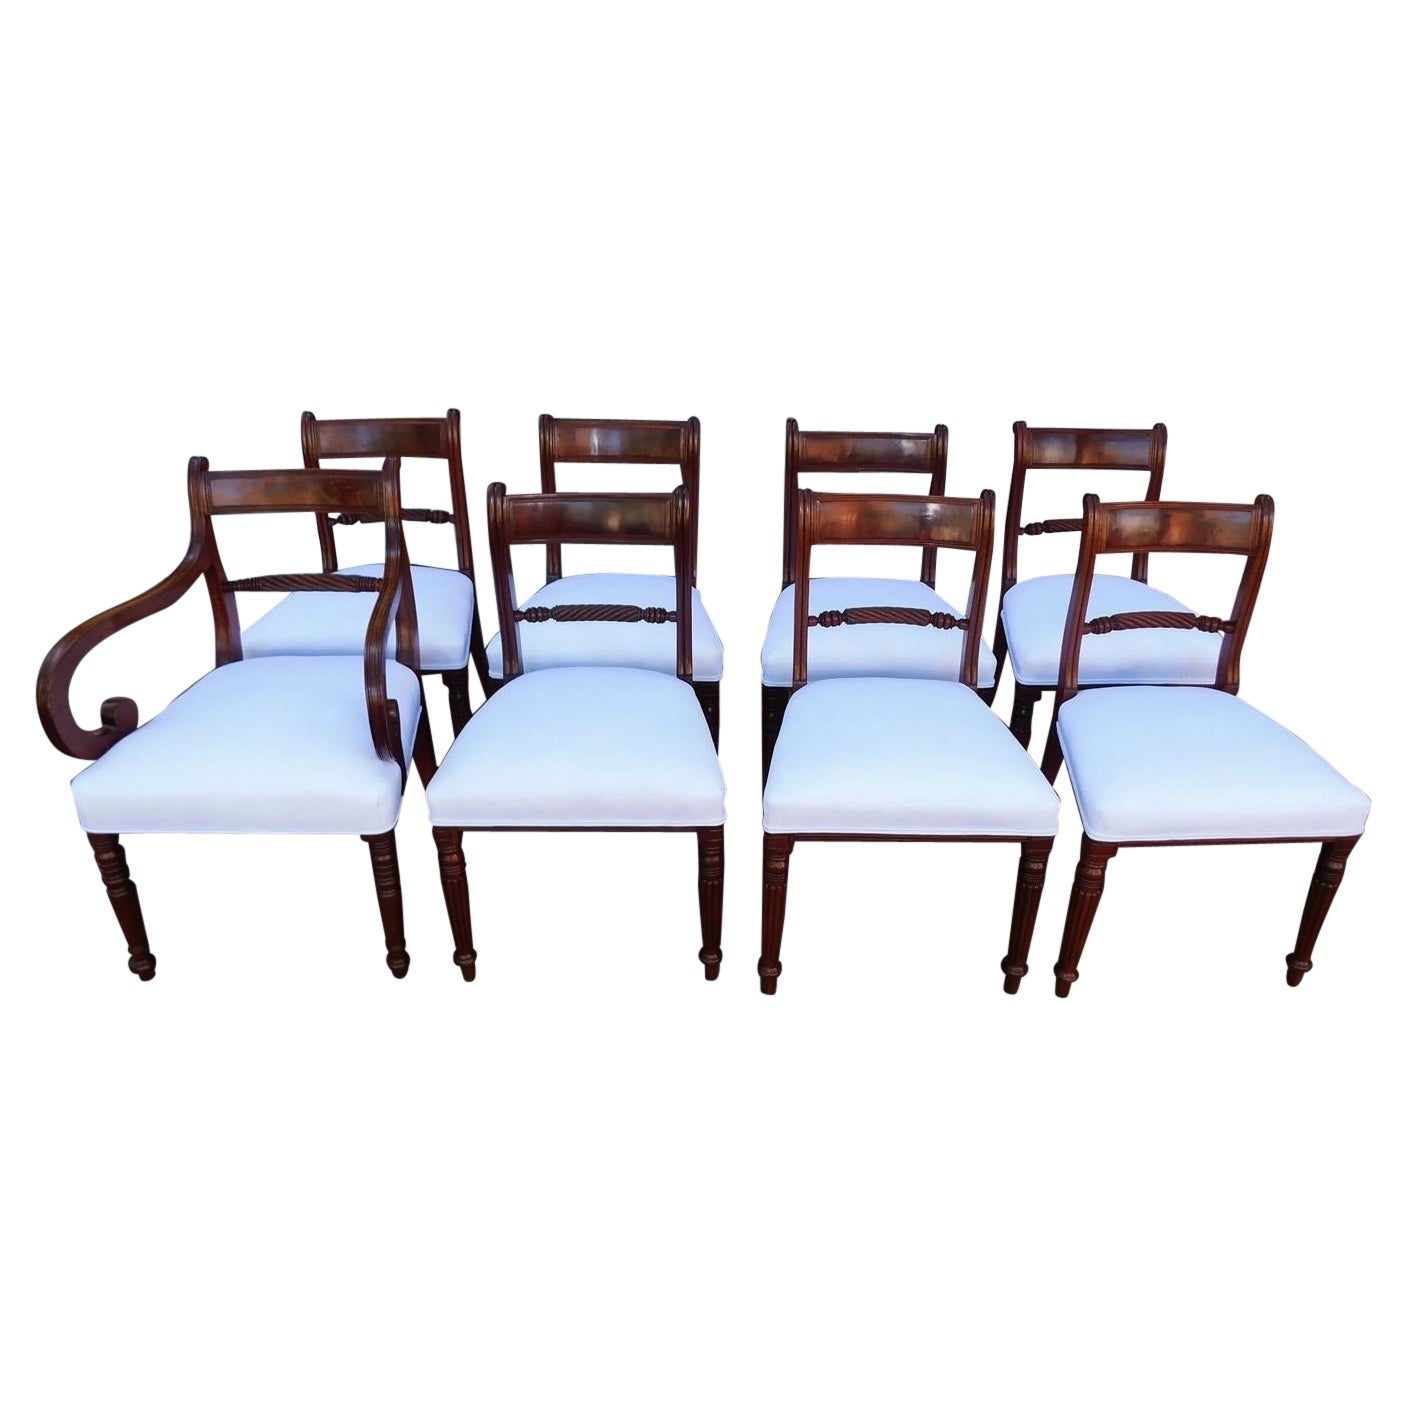 English Regency Set of Eight Mahogany Dining Room Chairs W/ Reeded Legs C. 1810